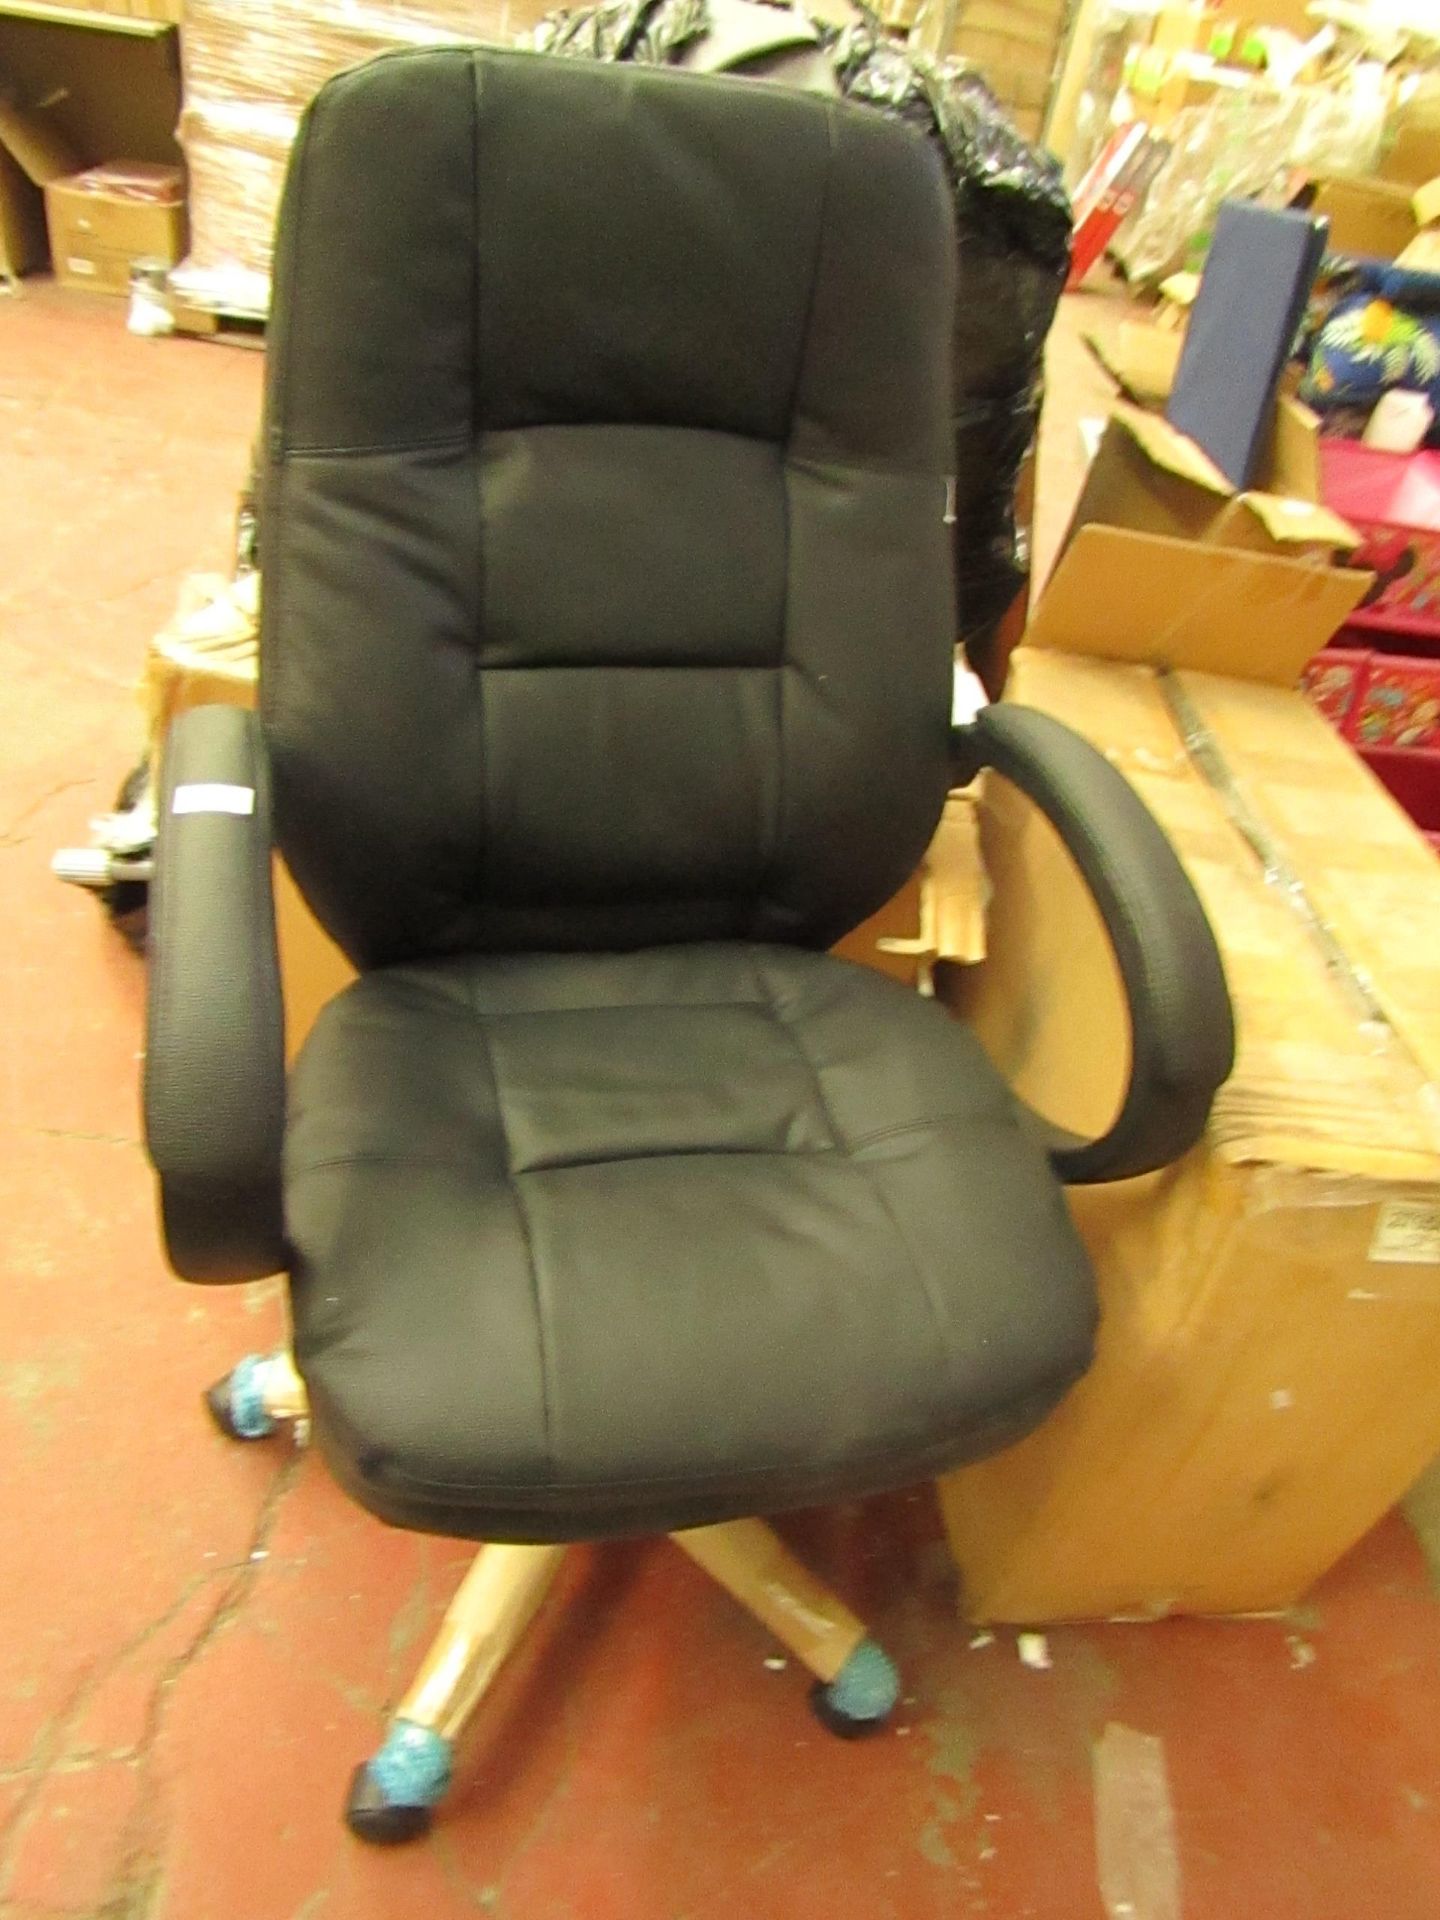 Classic Office Chair in Black & Chrome. New & Boxed